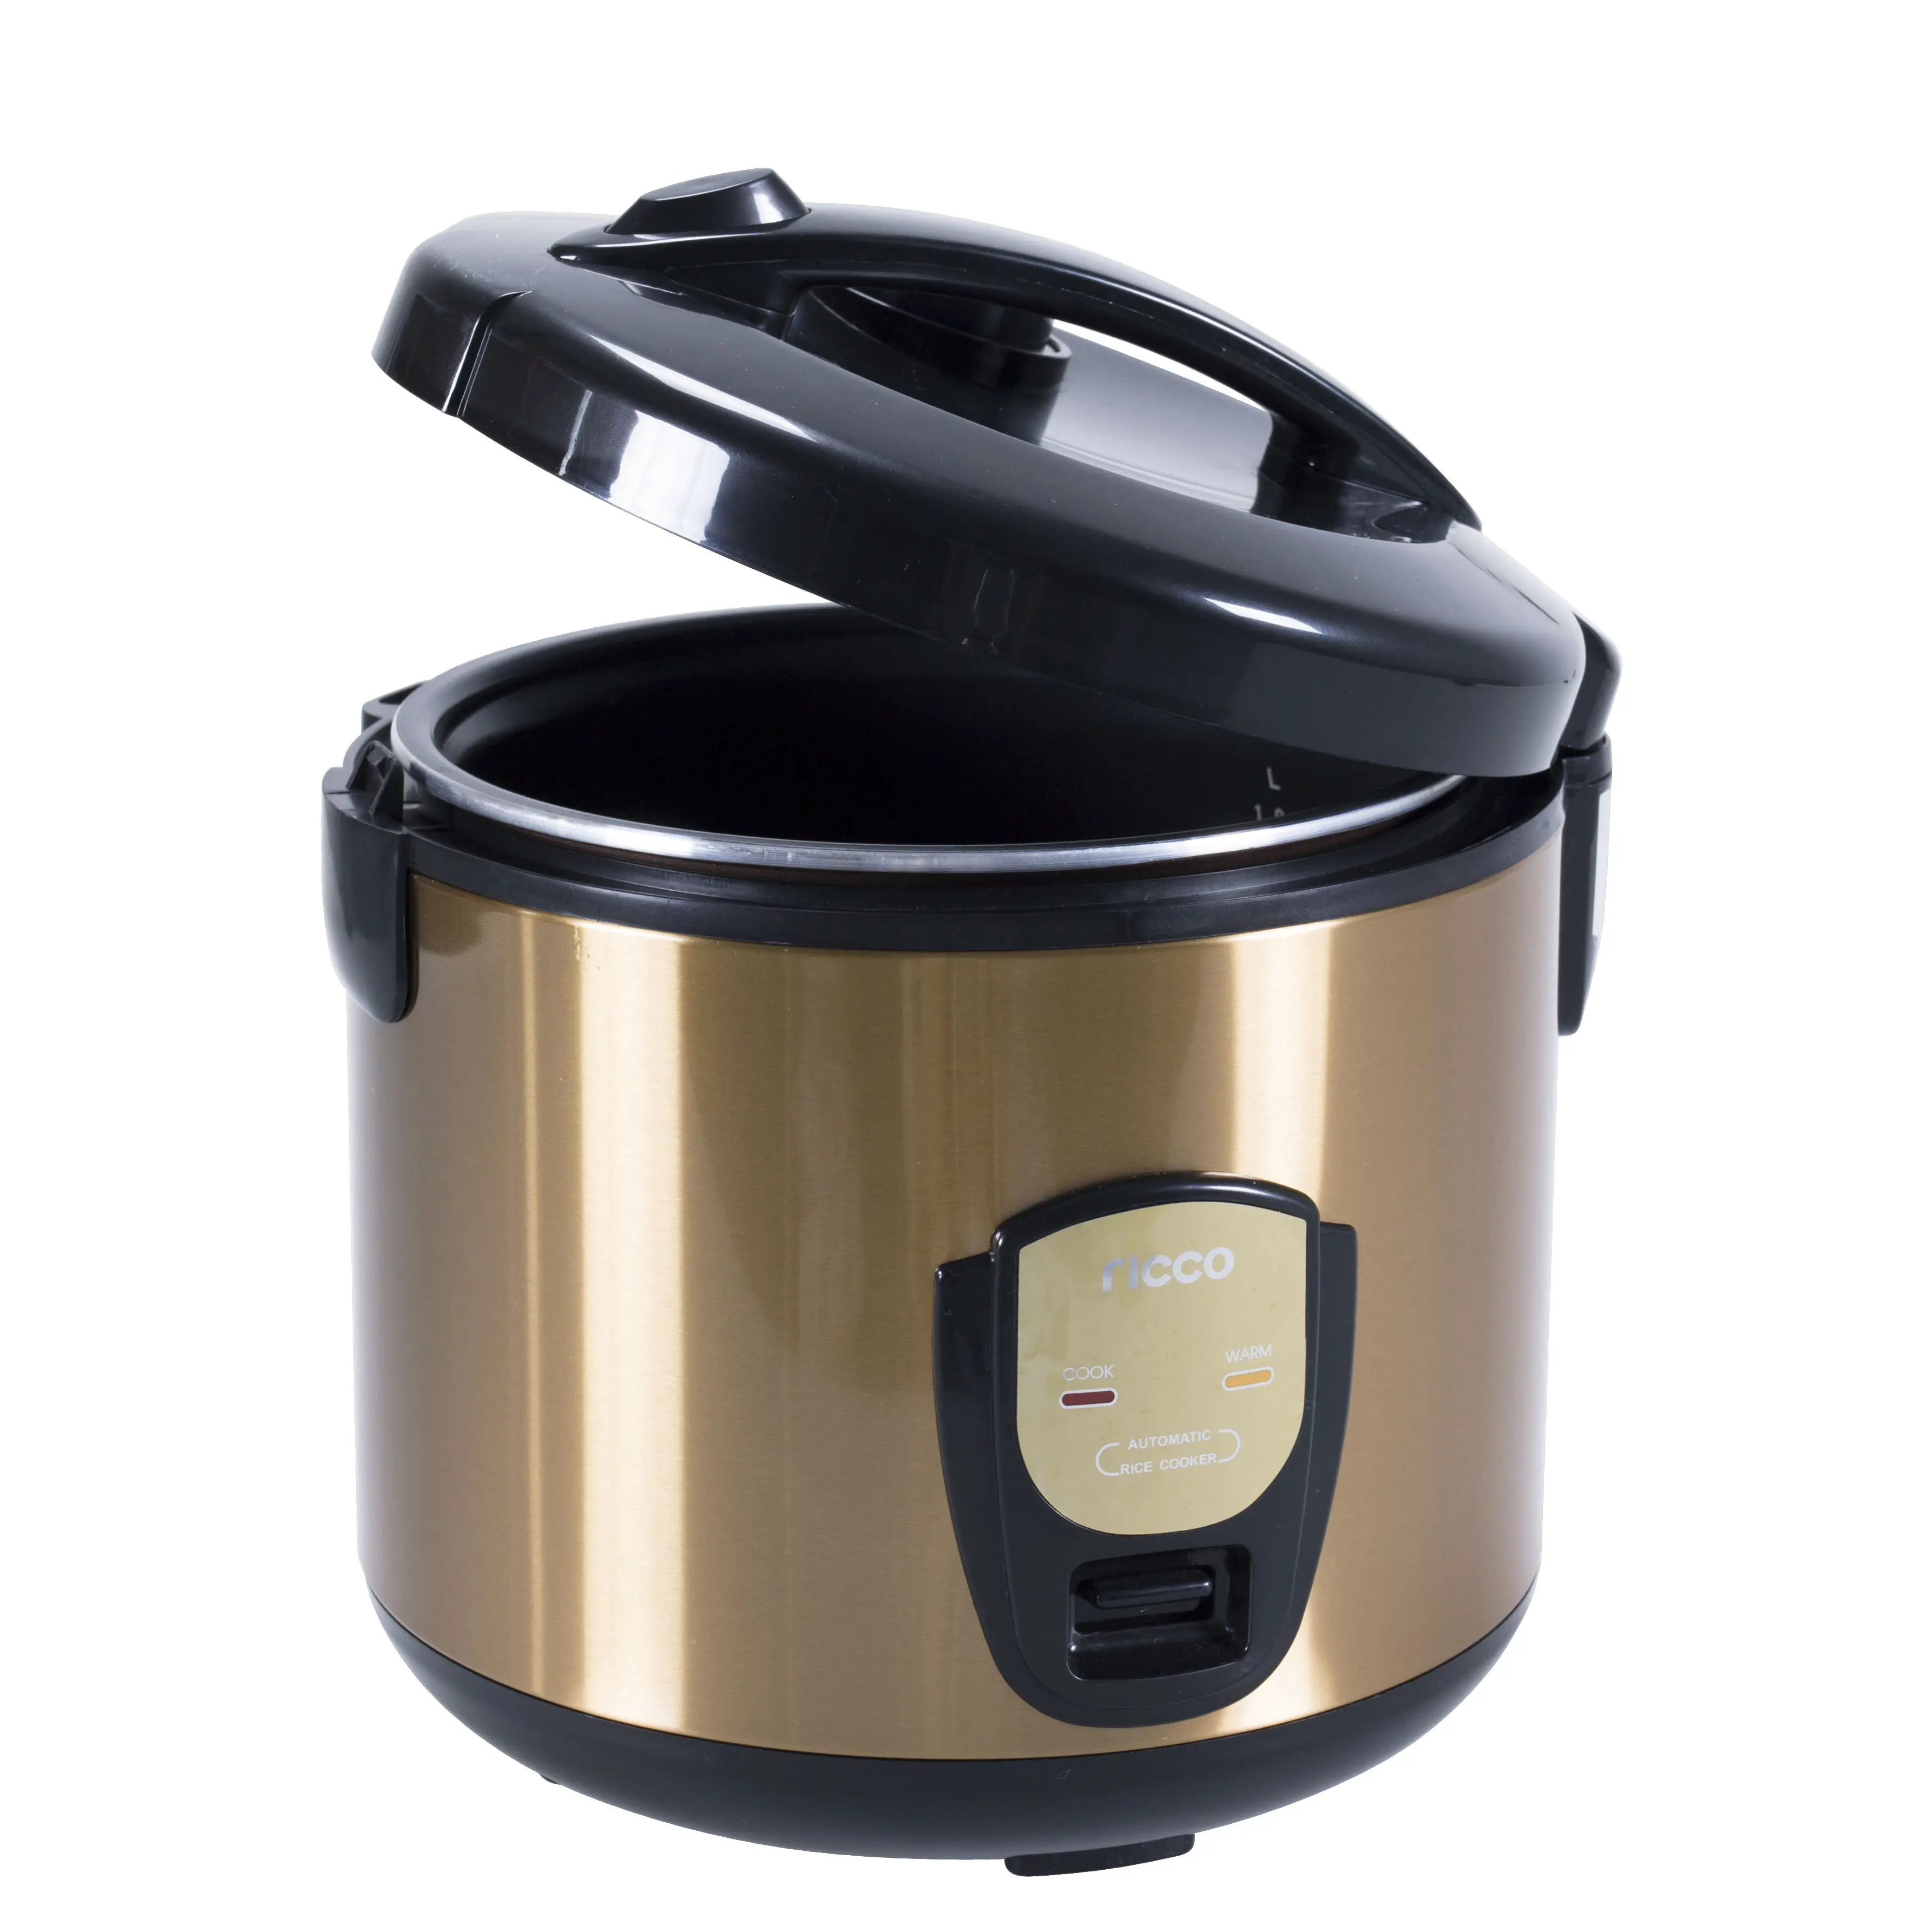 Modern design kitchen appliance gold color electric deluxe rice cooker 1.8L(5 ltr) with plastic steamer spare part